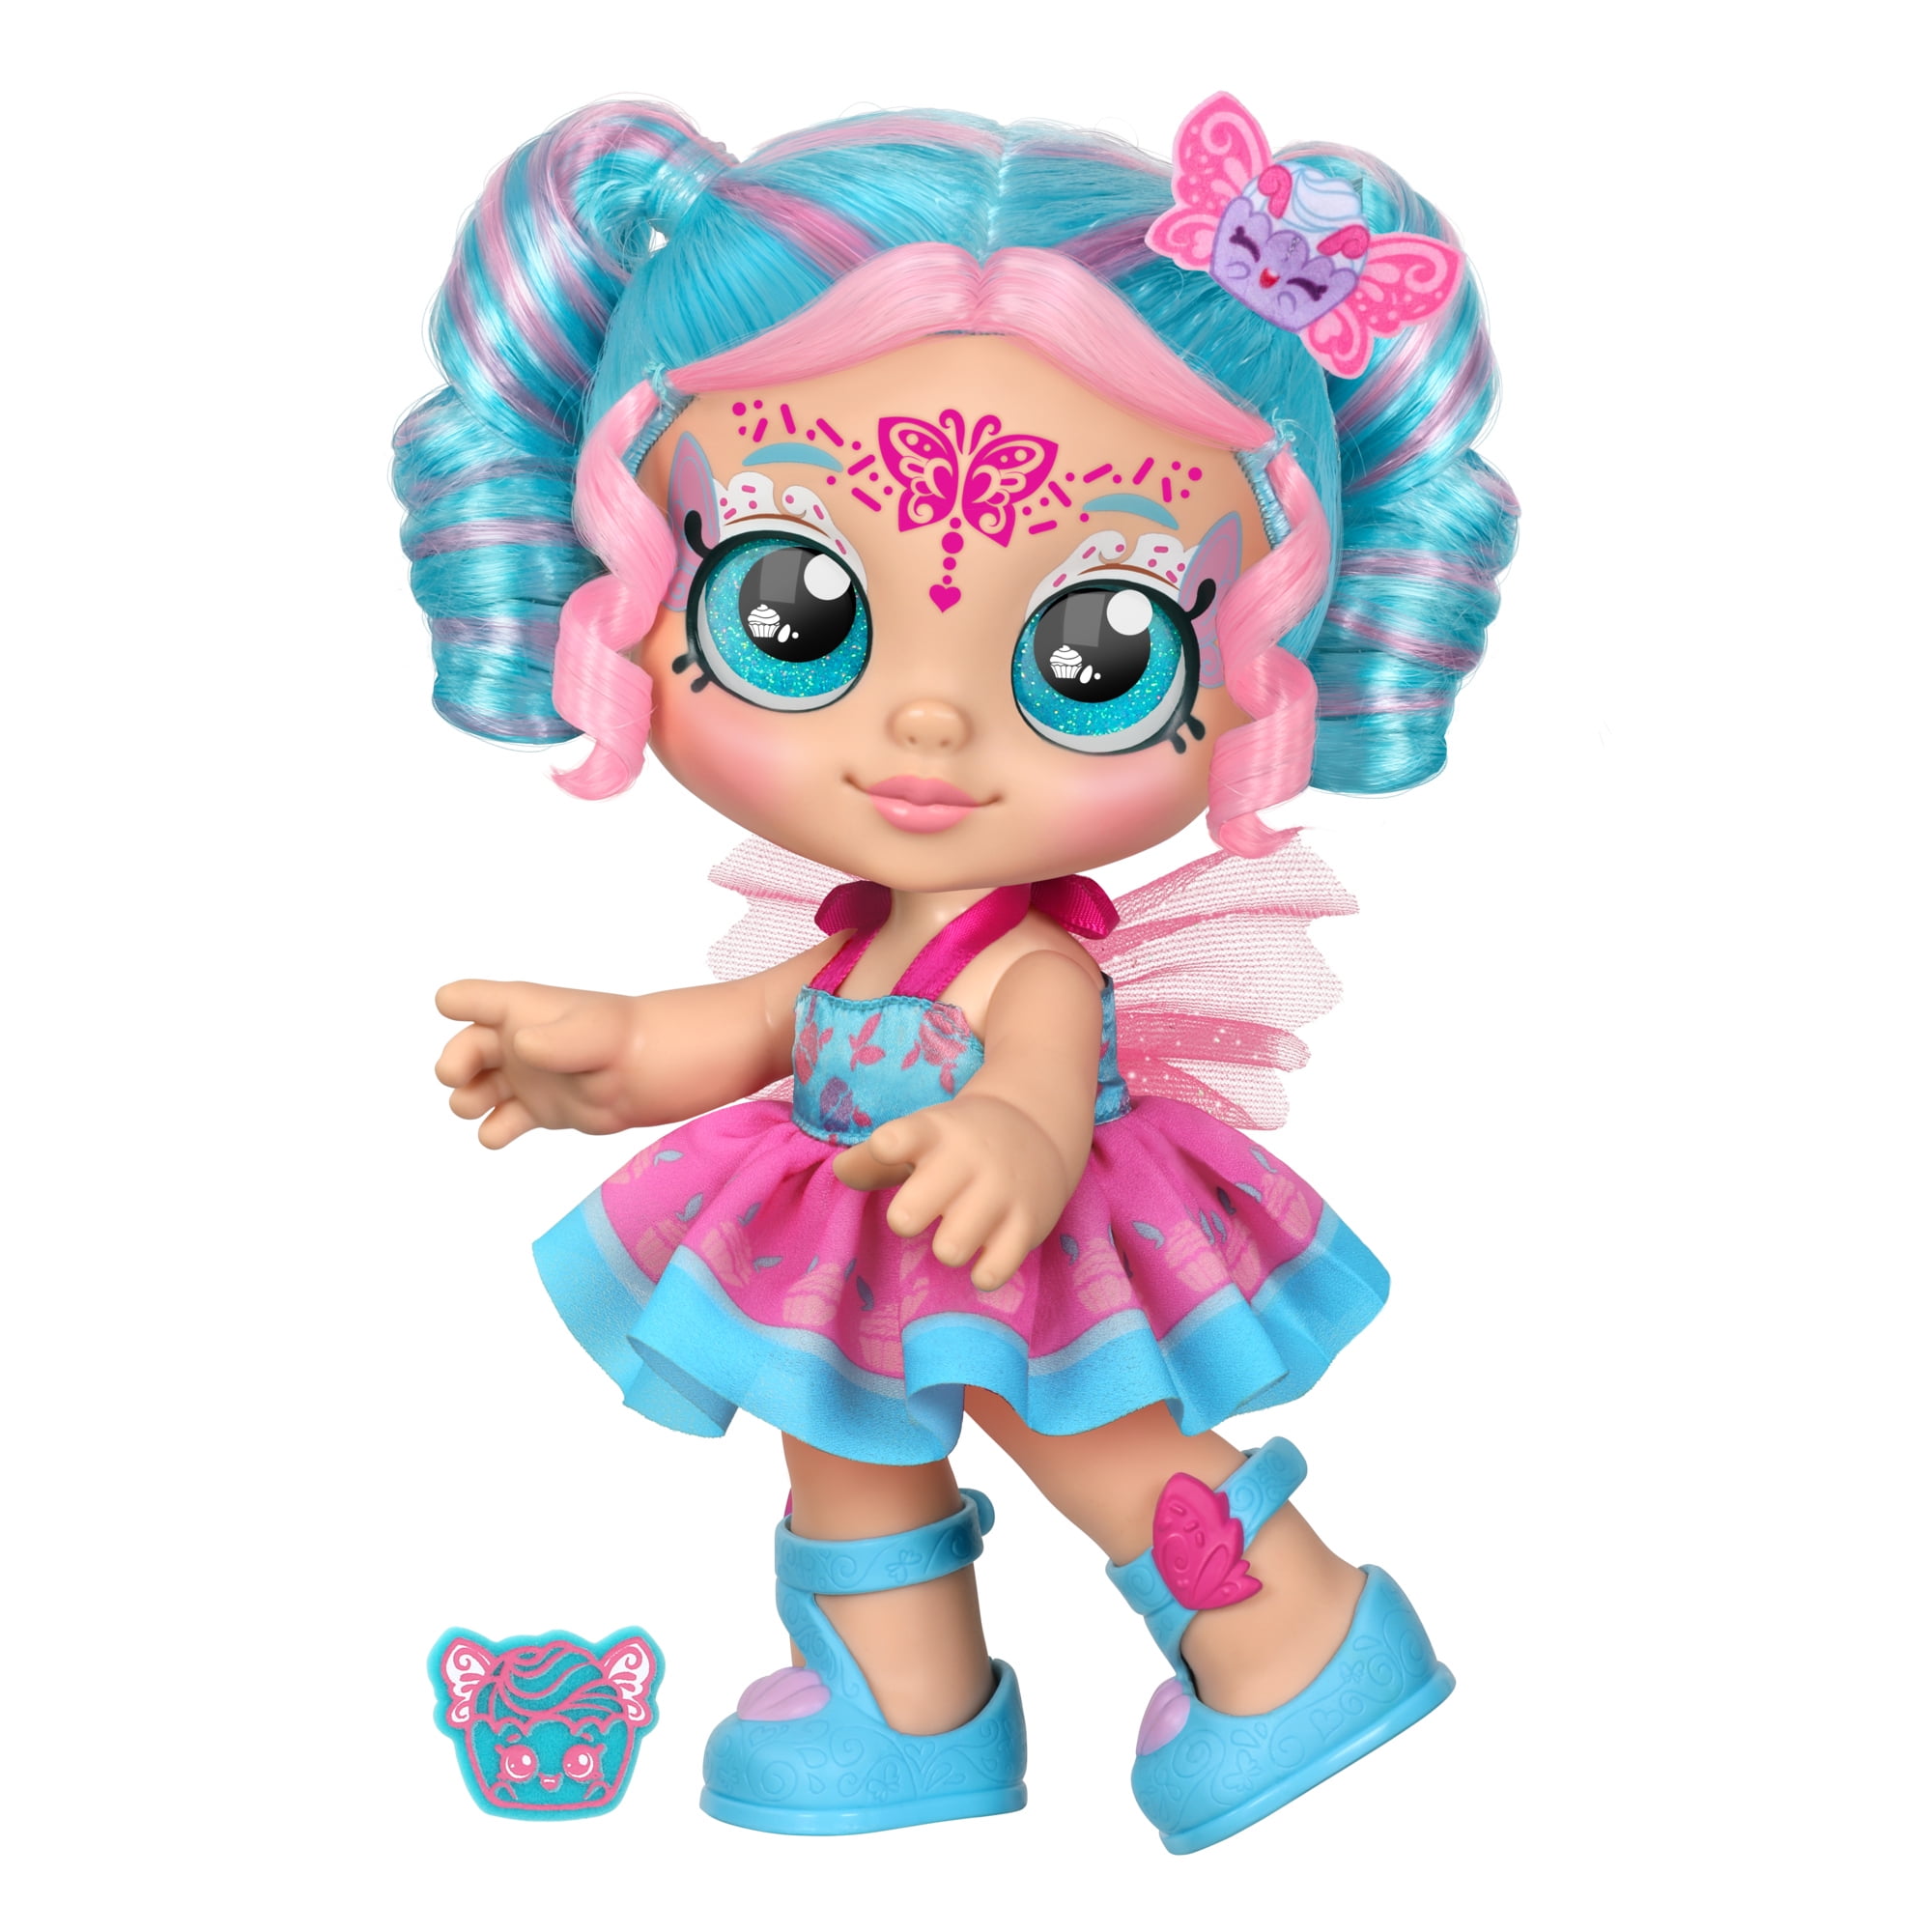 Kindi Kids Dress Up Magic Jessicake Fairy Toddler Doll with Face Paint Reveal, Girls, Ages 3+